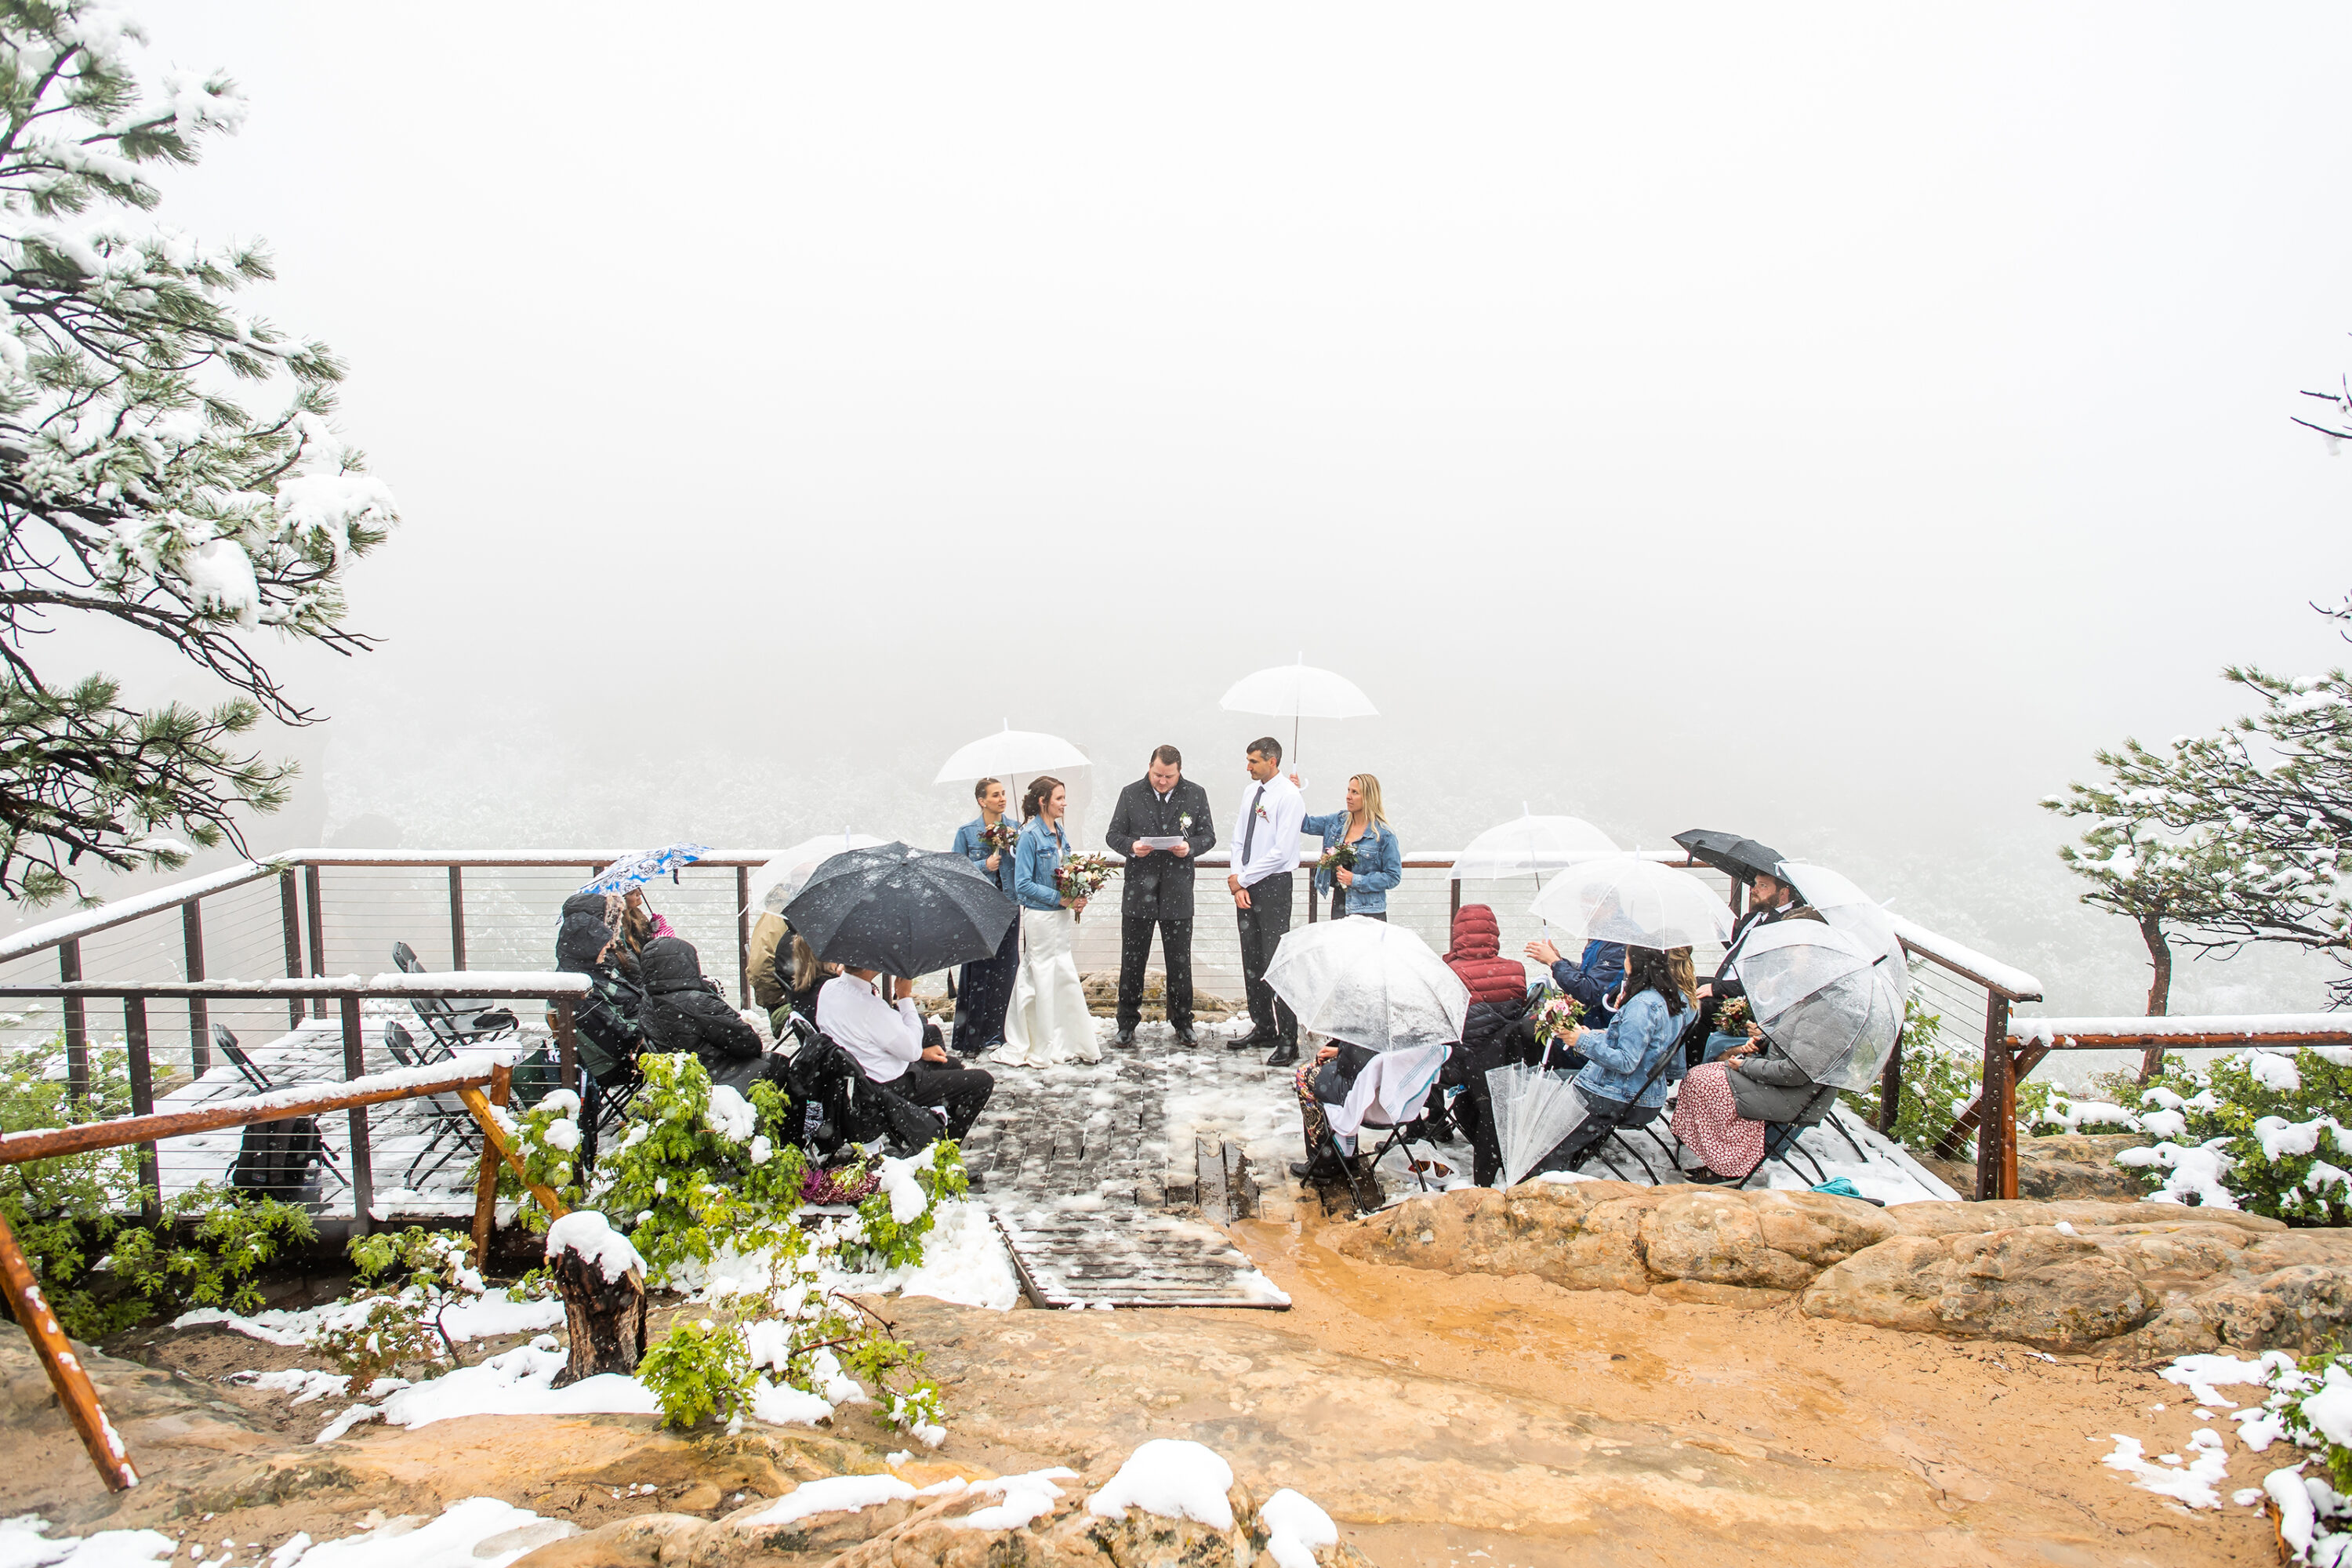 A general view of a Roxborough State Park wedding at Lyons Overlook in the snow.